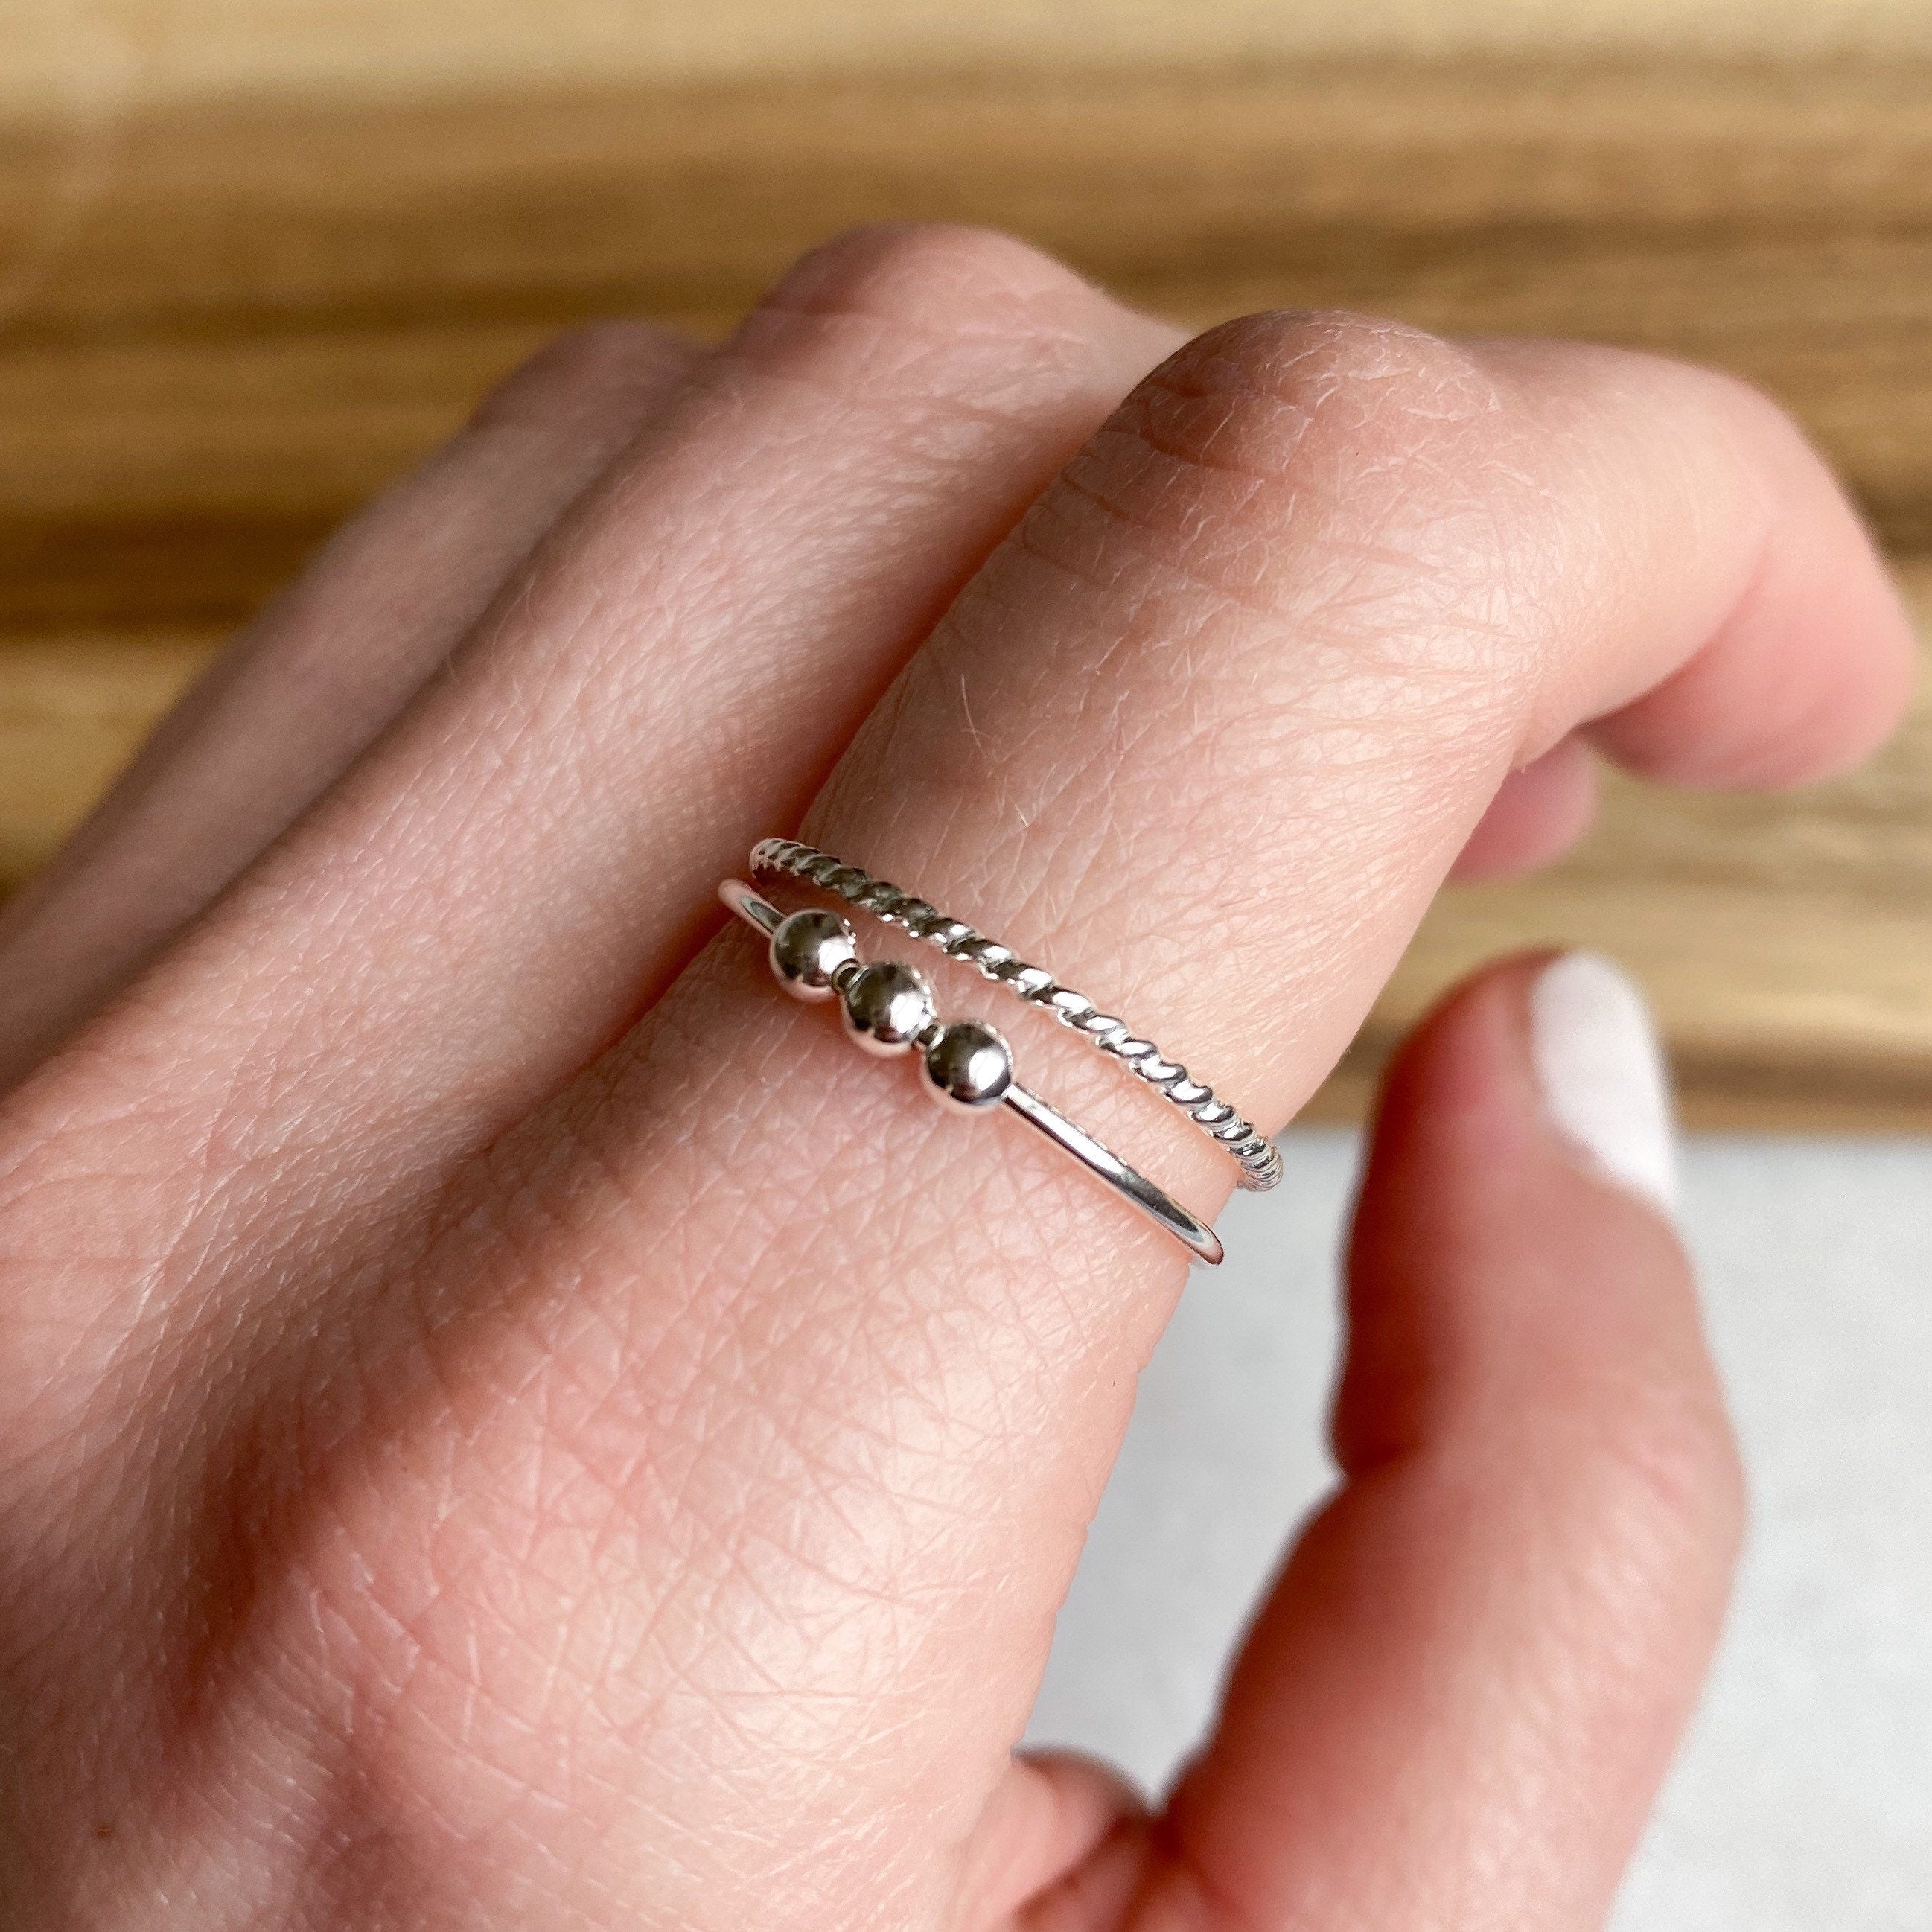 Silver Spinner Anti-Anxiety Ring | 1+1 FREE